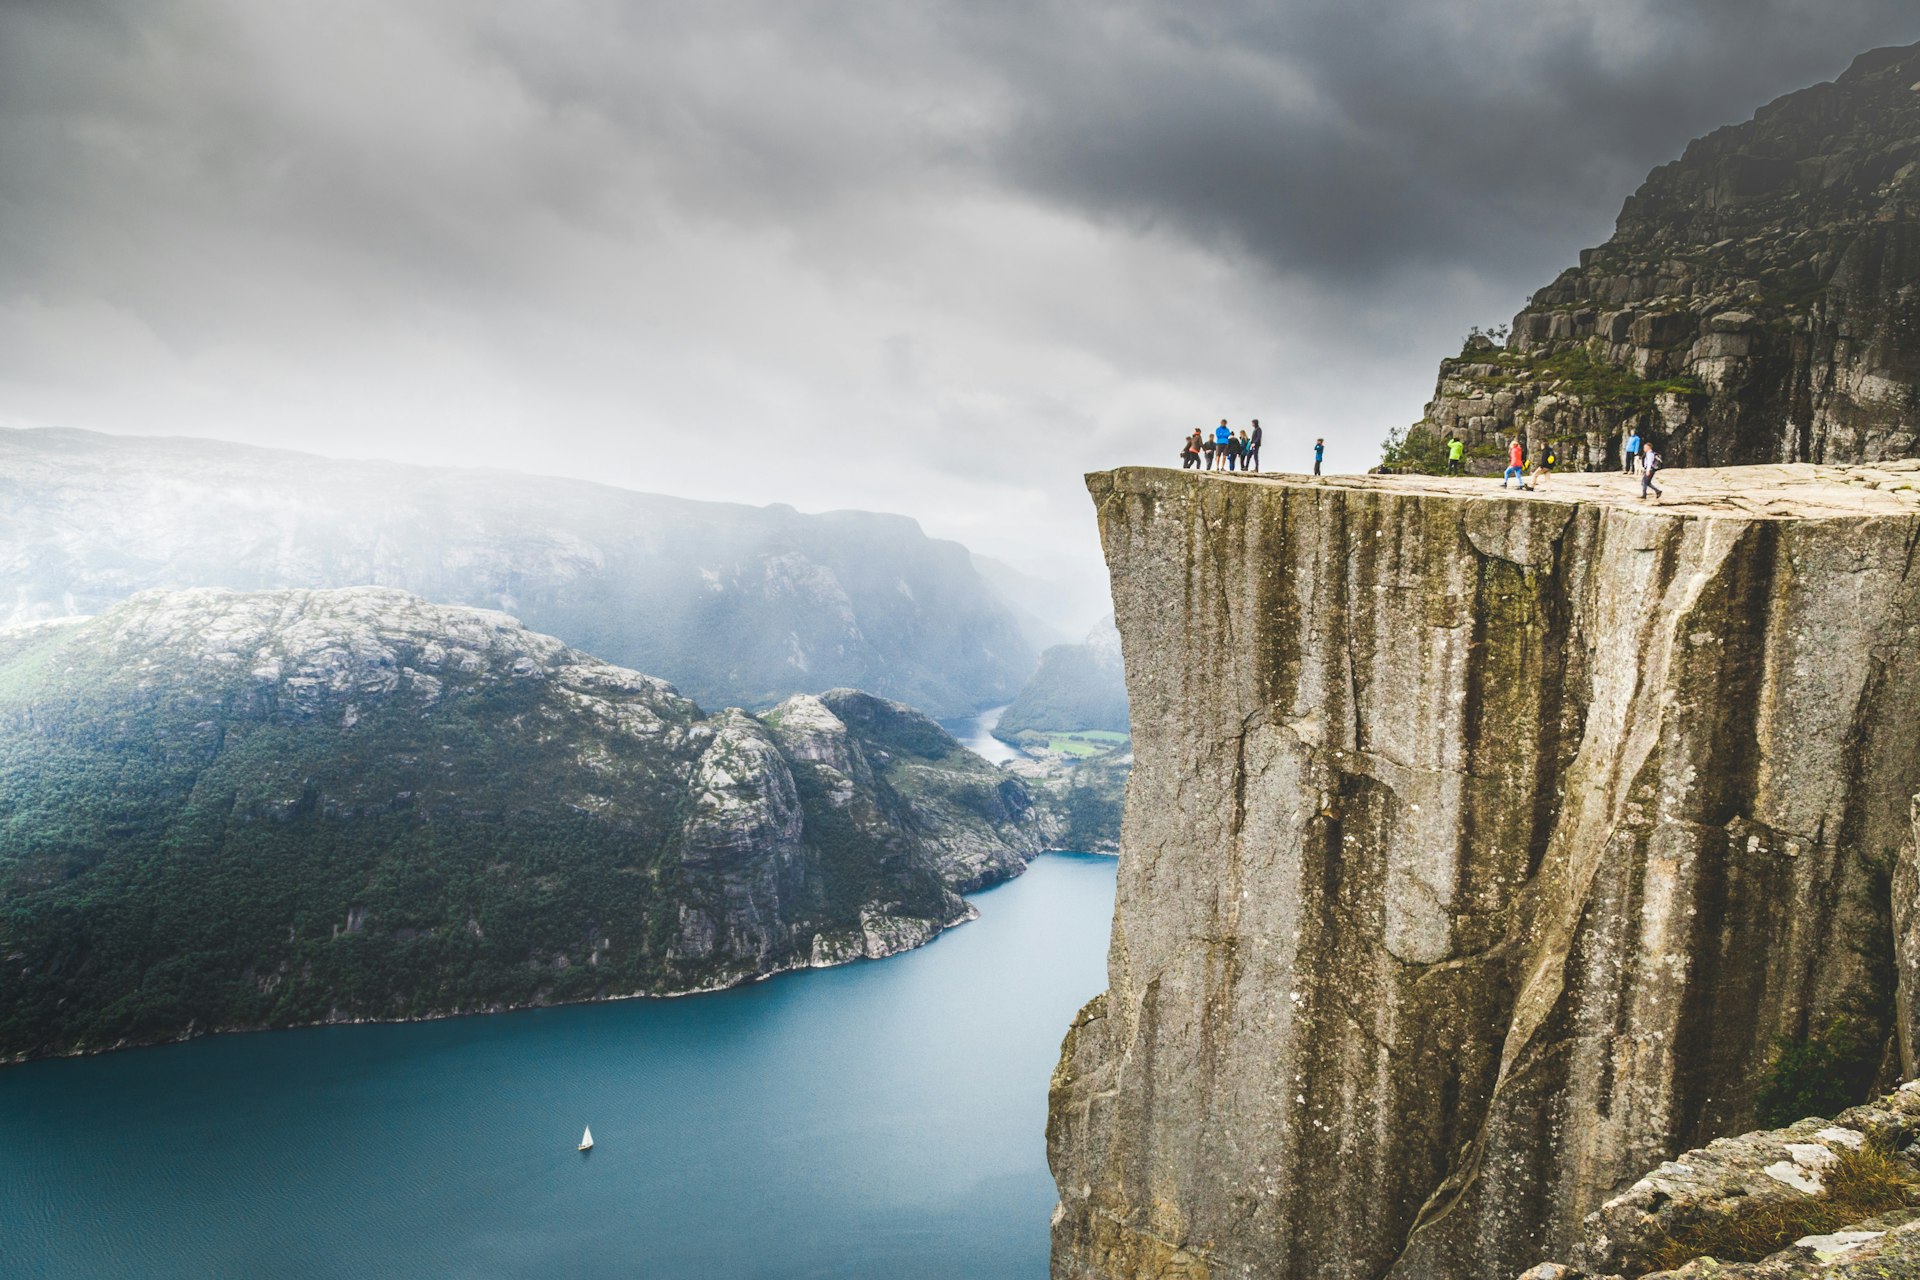 People walking upon Preikestolen, famous nature landmark in Norwey. Lysefjorden and mountains in background.